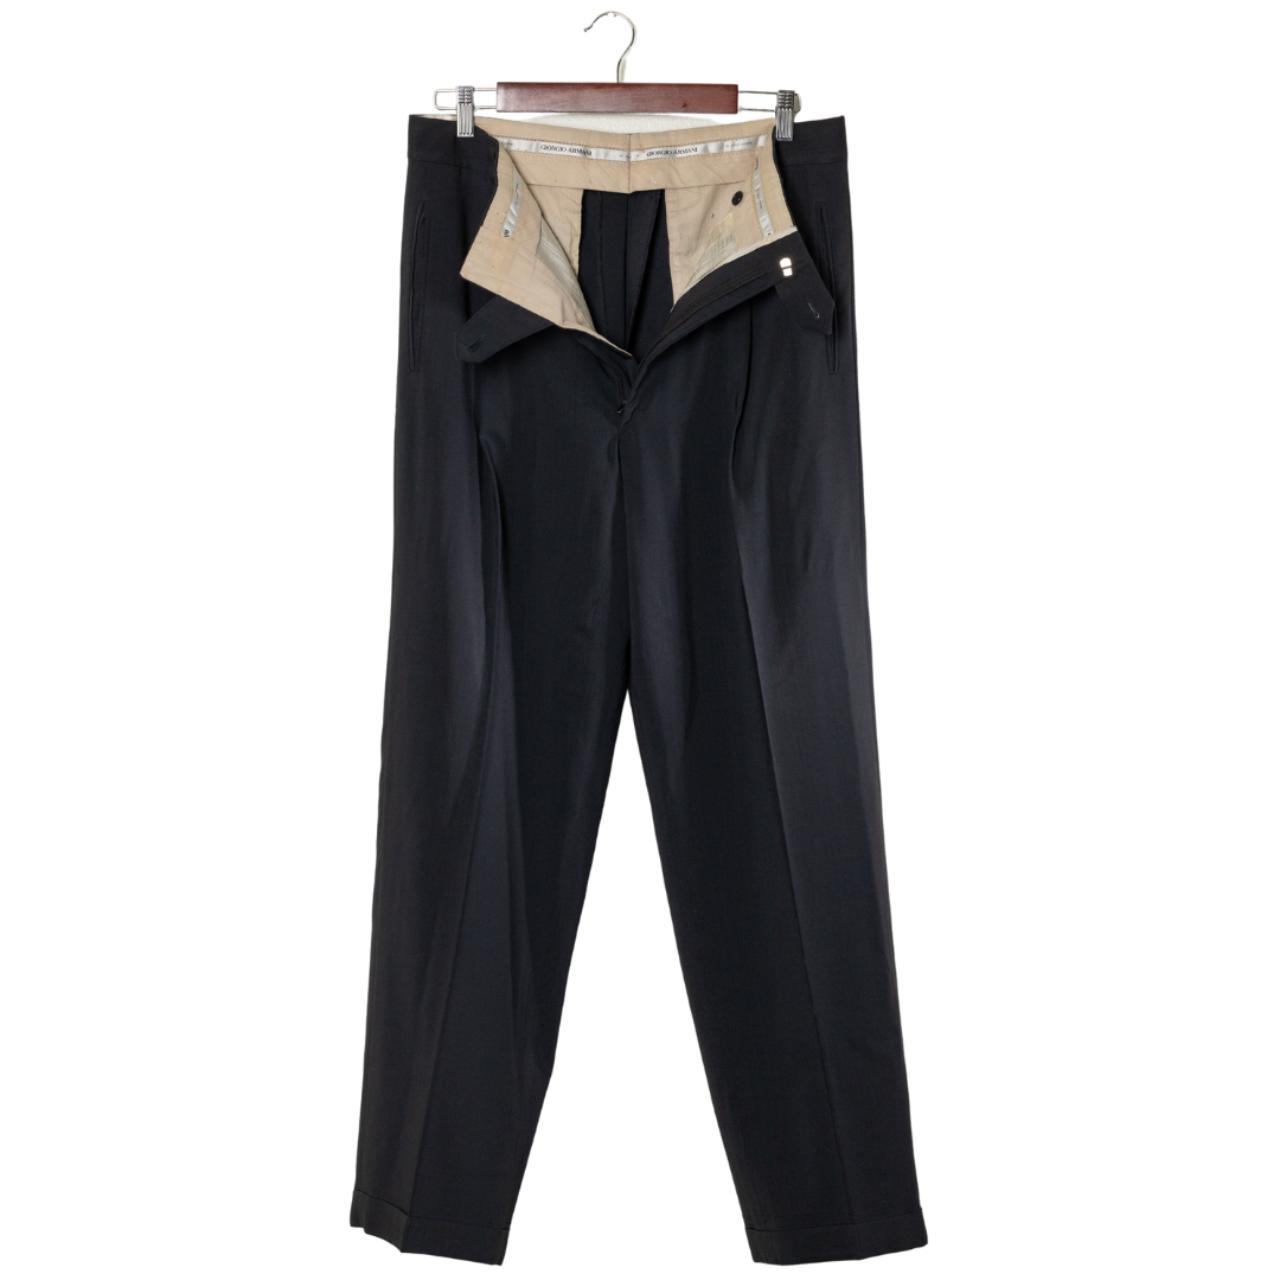 Armani Men's Black and Navy Trousers (4)